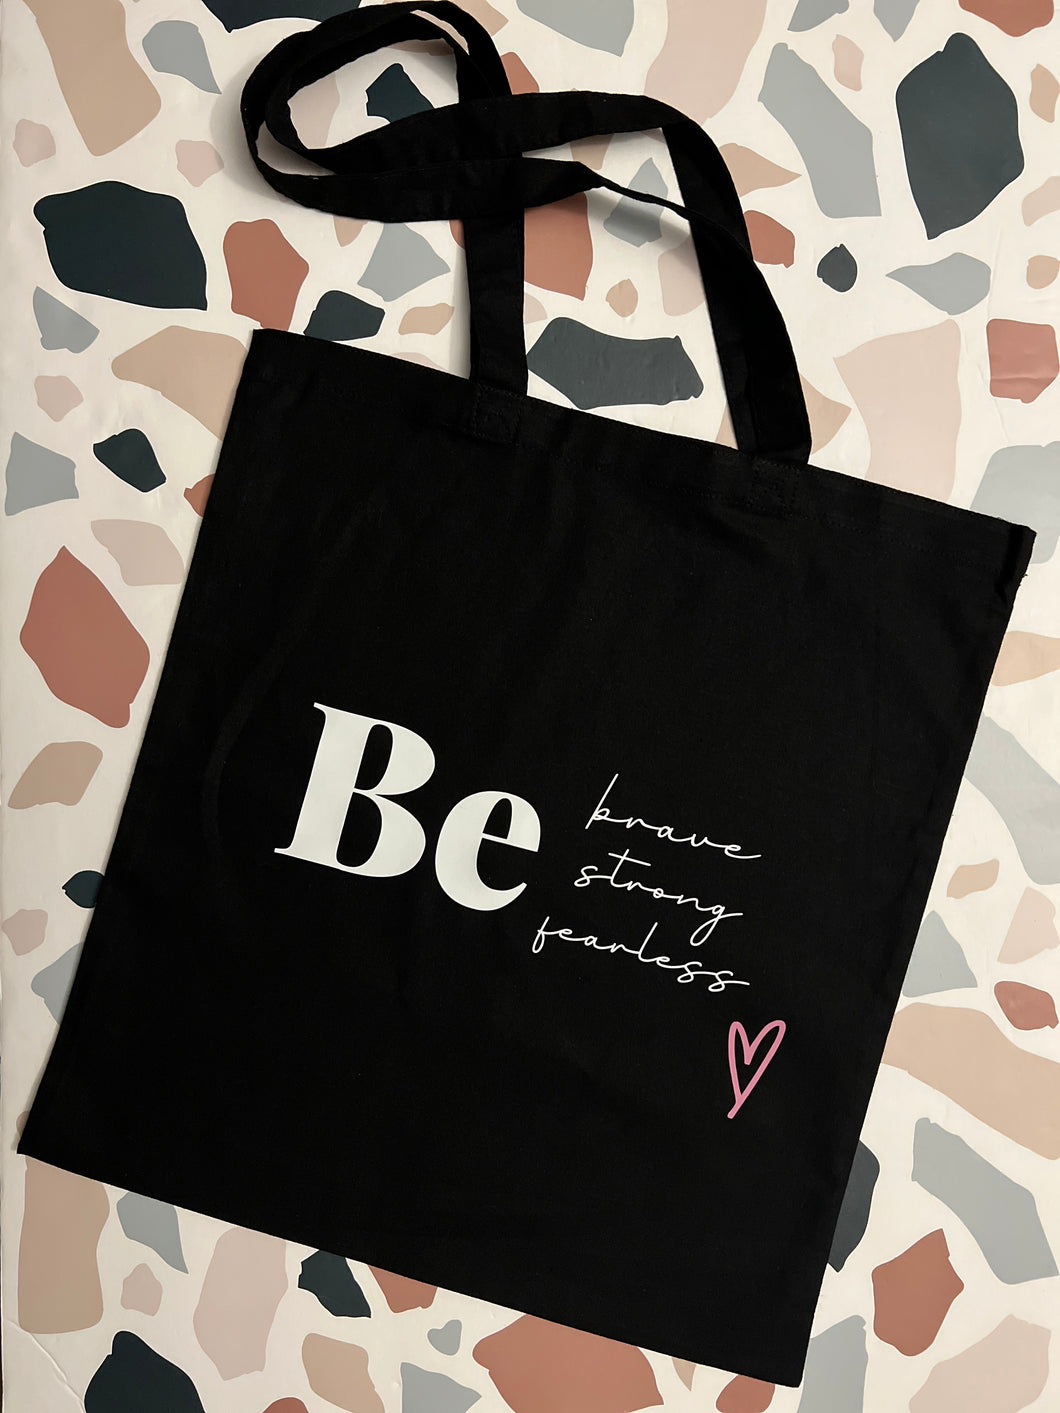 Be brave, strong, fearless black tote